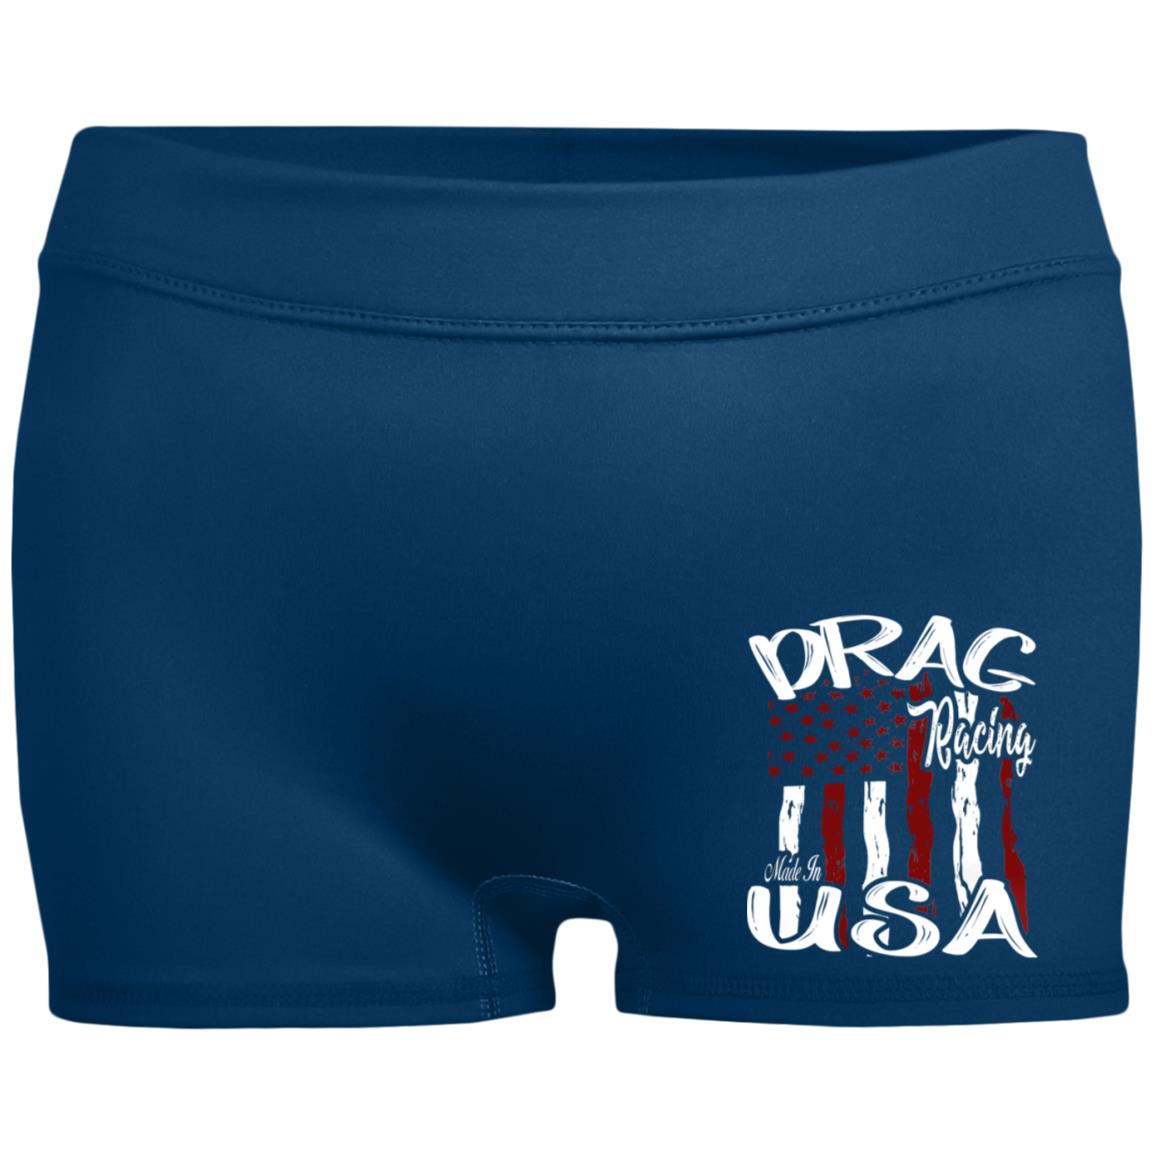 Drag Racing Made In USA Ladies' Fitted Moisture-Wicking 2.5 inch Inseam Shorts